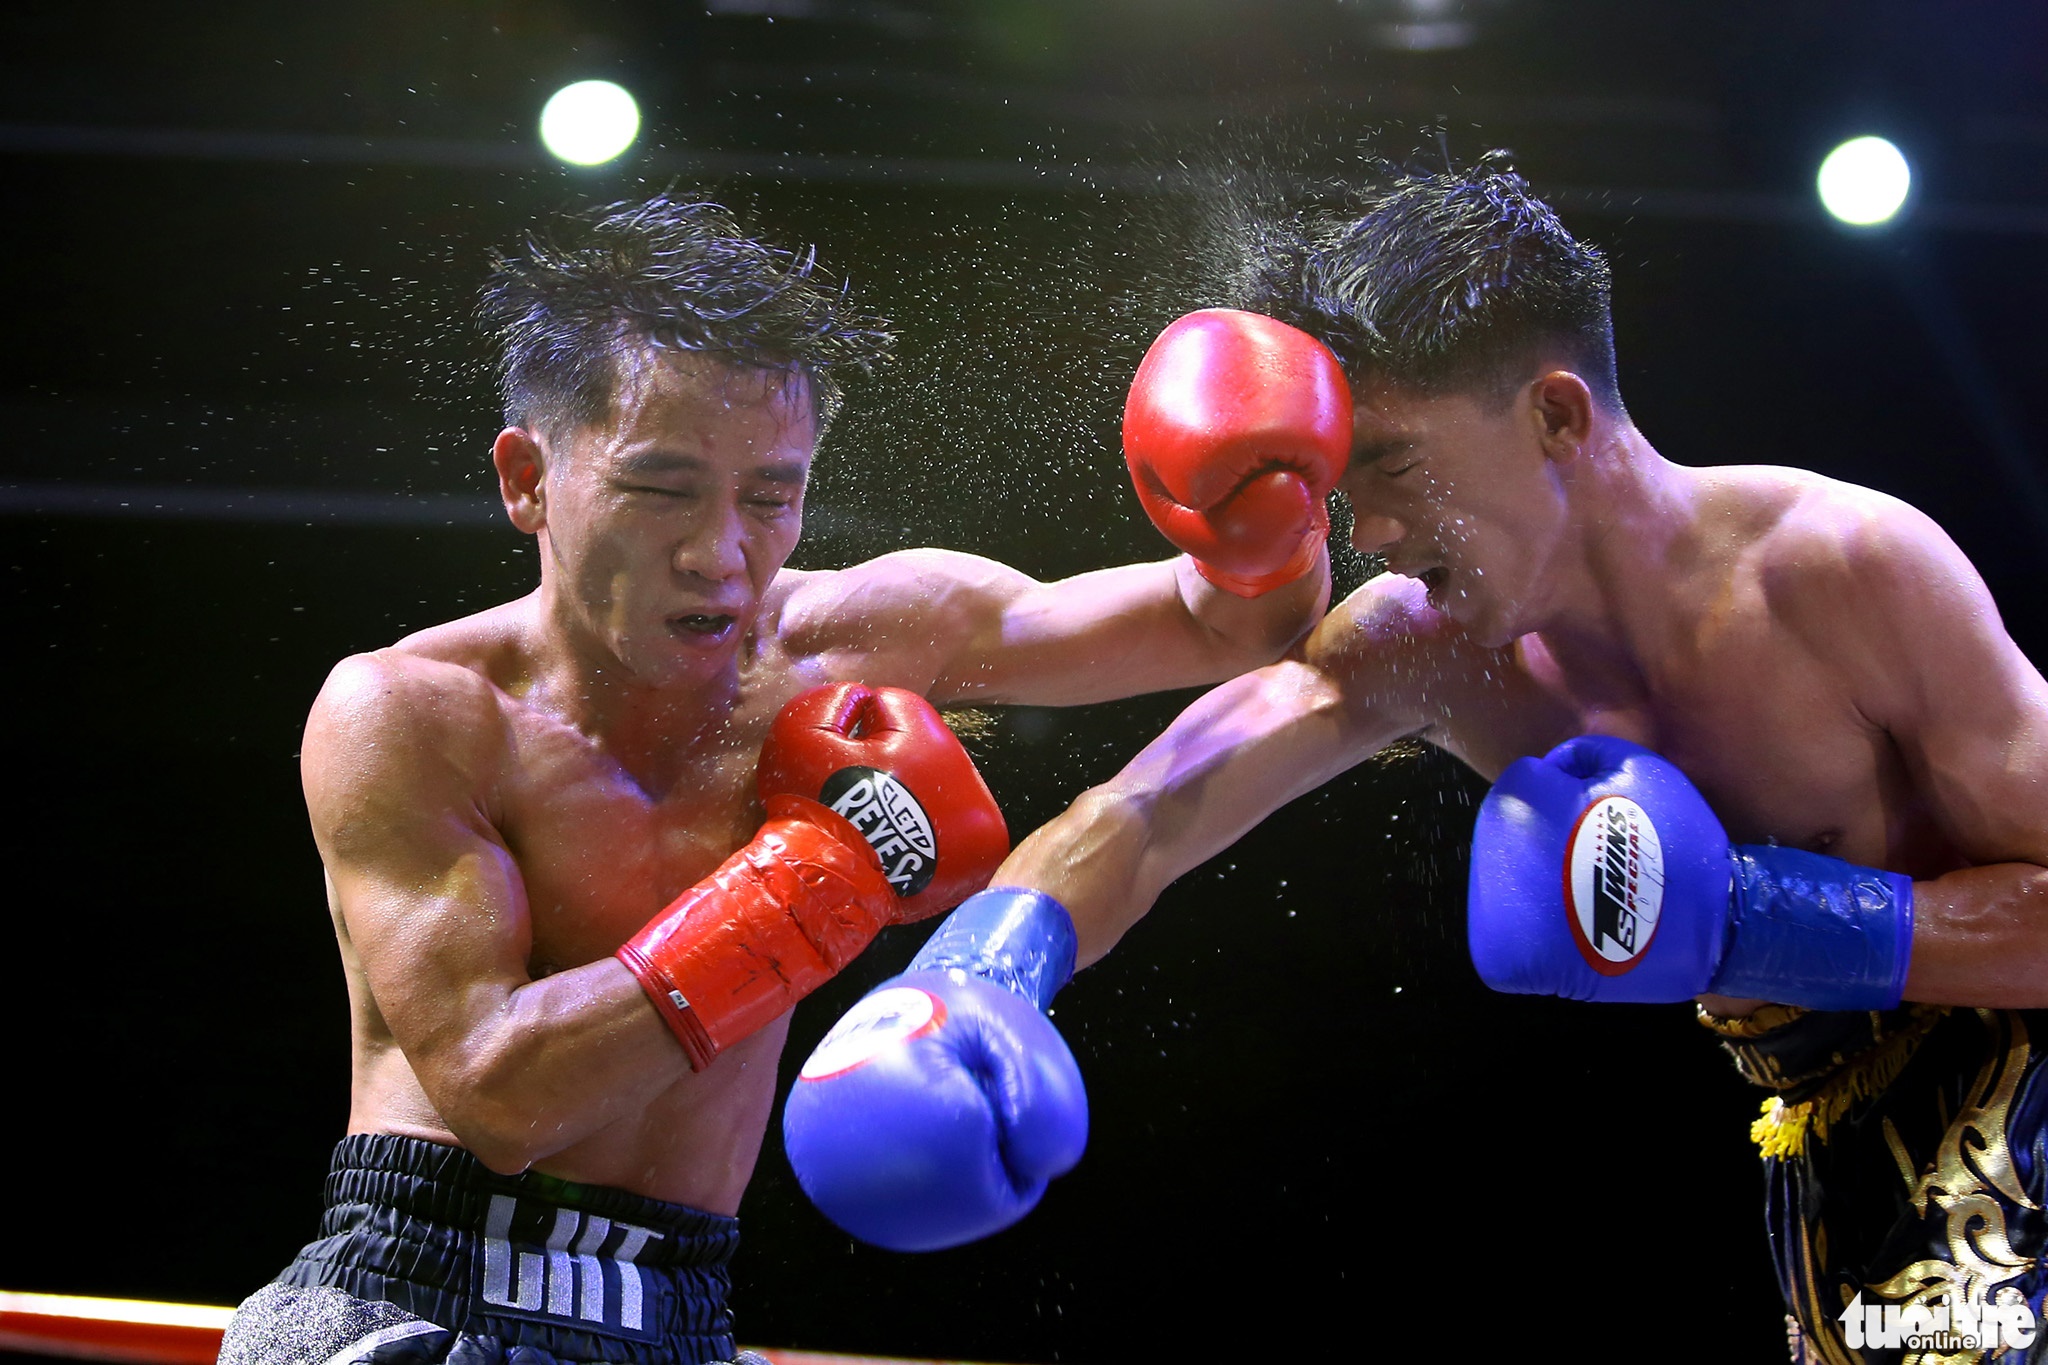 Vietnamese boxer Le Huu Toan (left) competes for the minimum weight class at the WBA Asia Championship in Ho Chi Minh City, March 20, 2022. Photo: Hoang Tung / Tuoi Tre